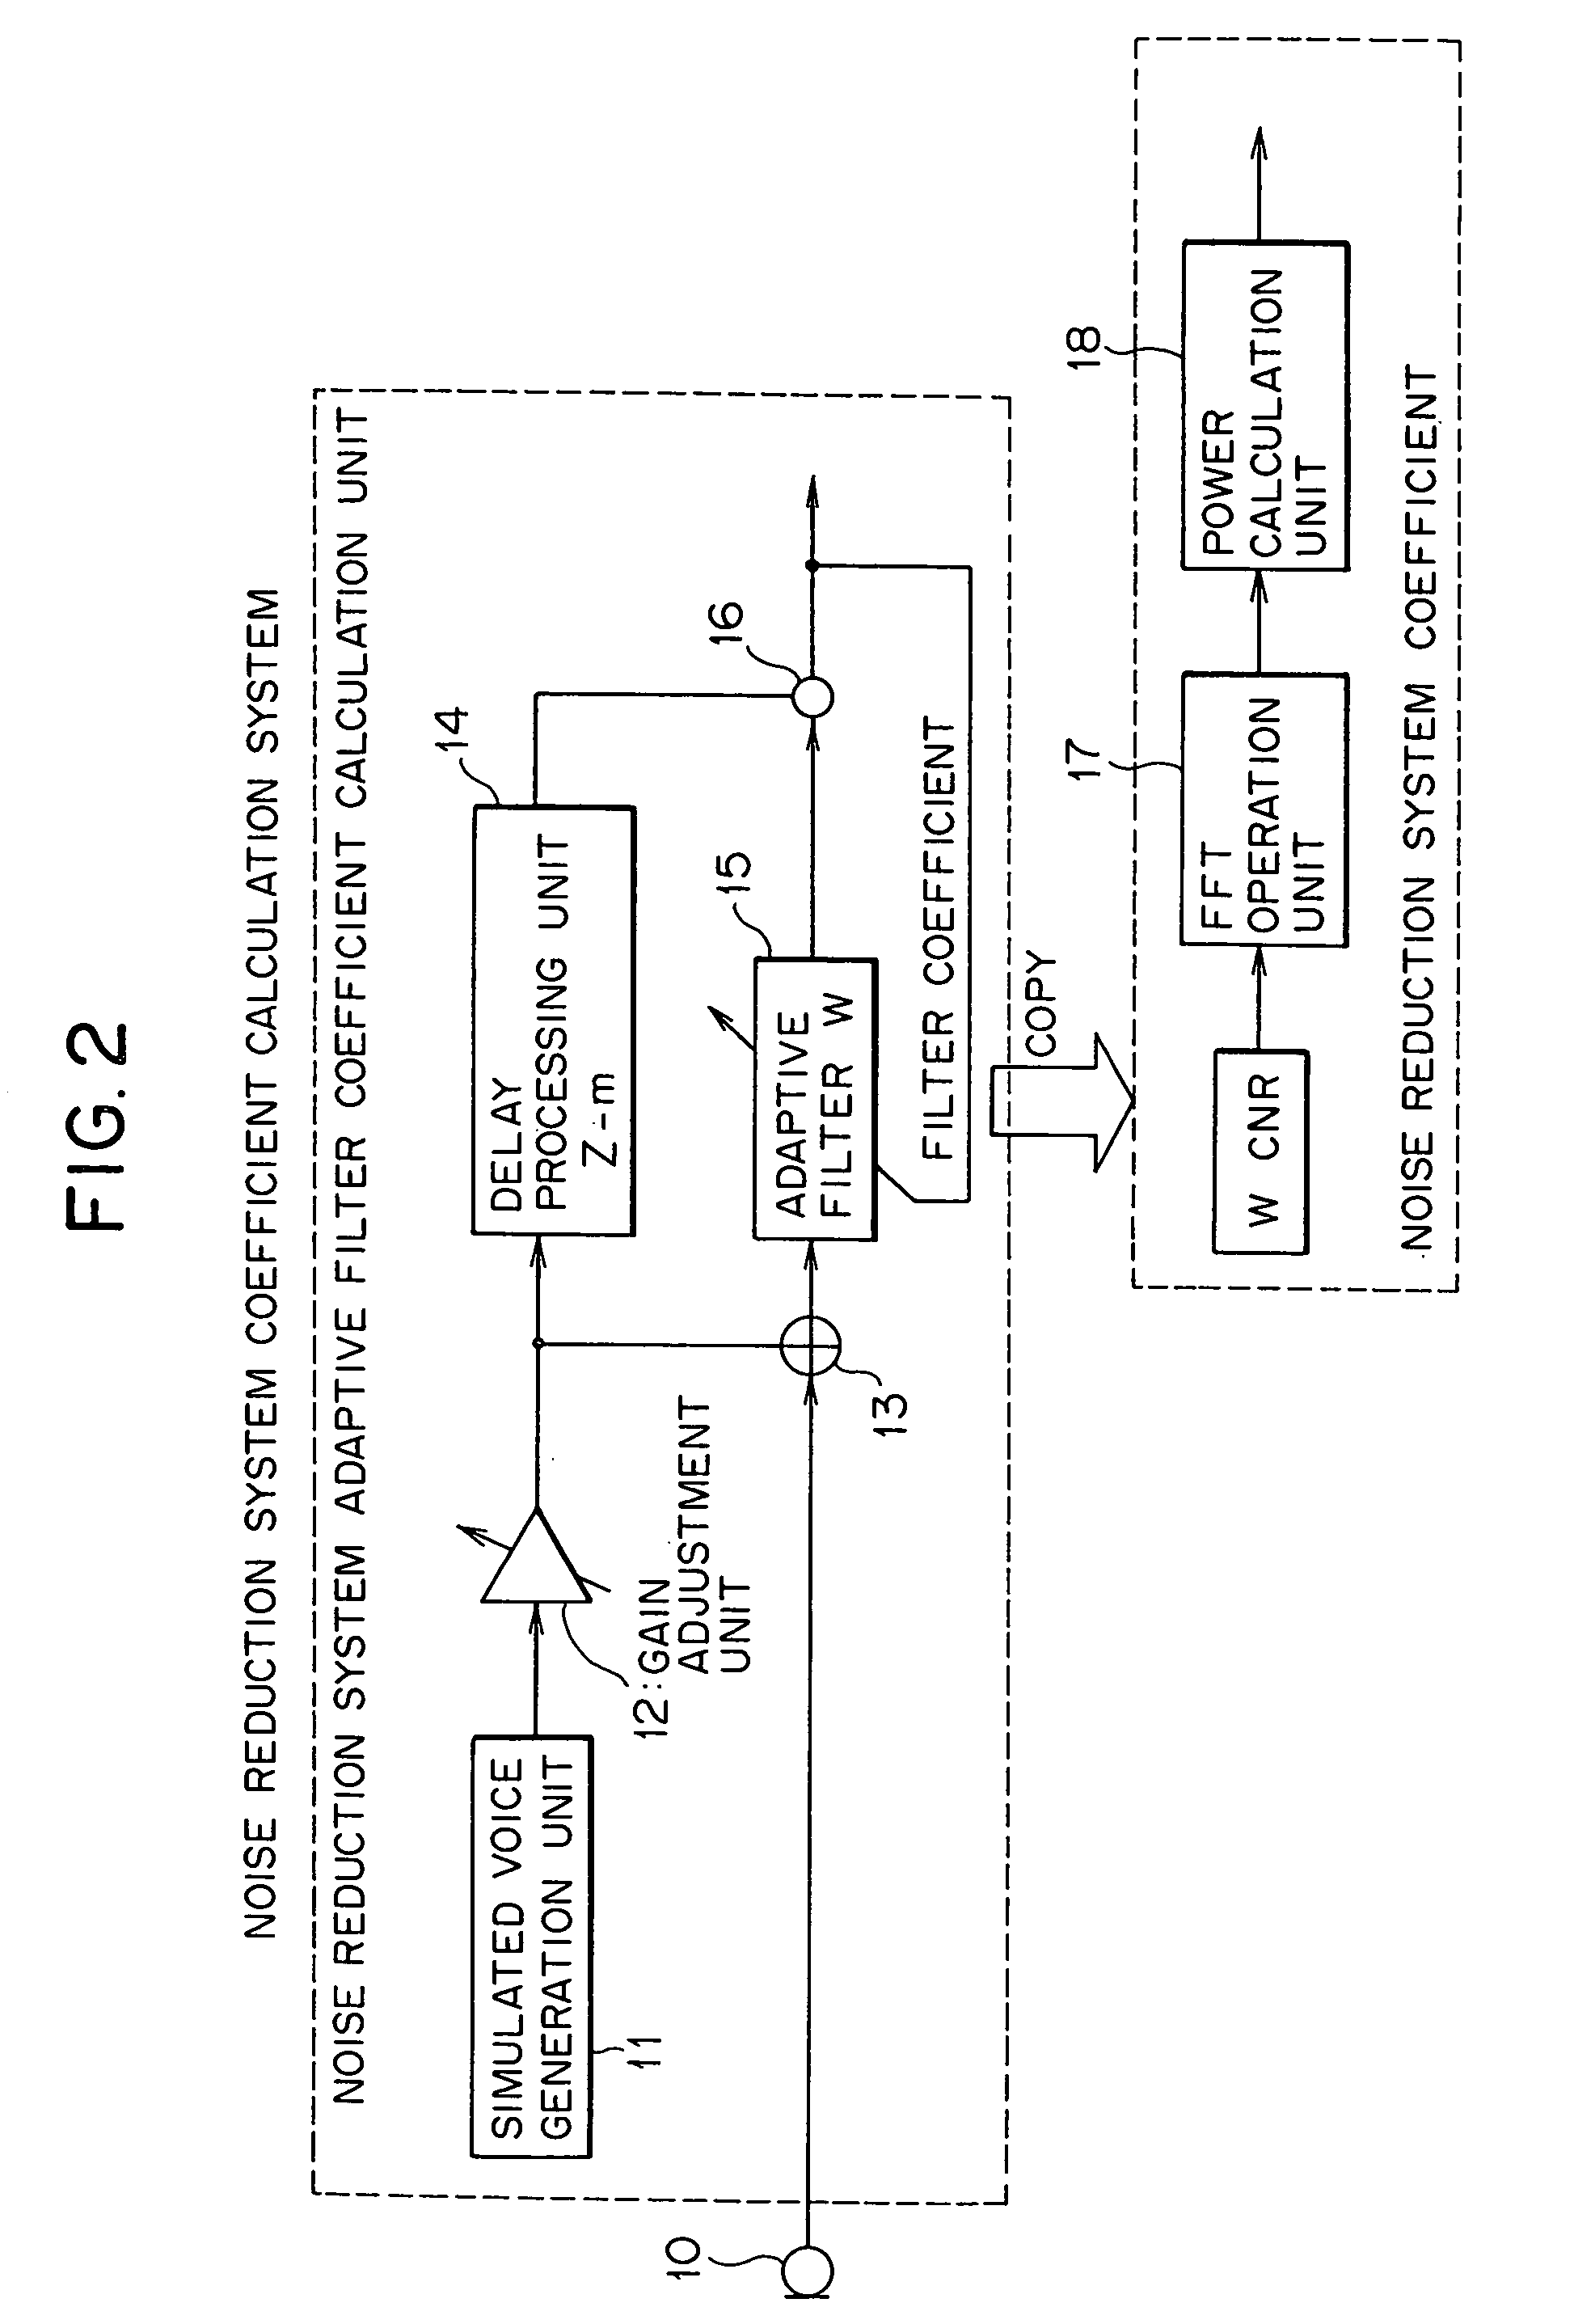 Voice feature extraction device